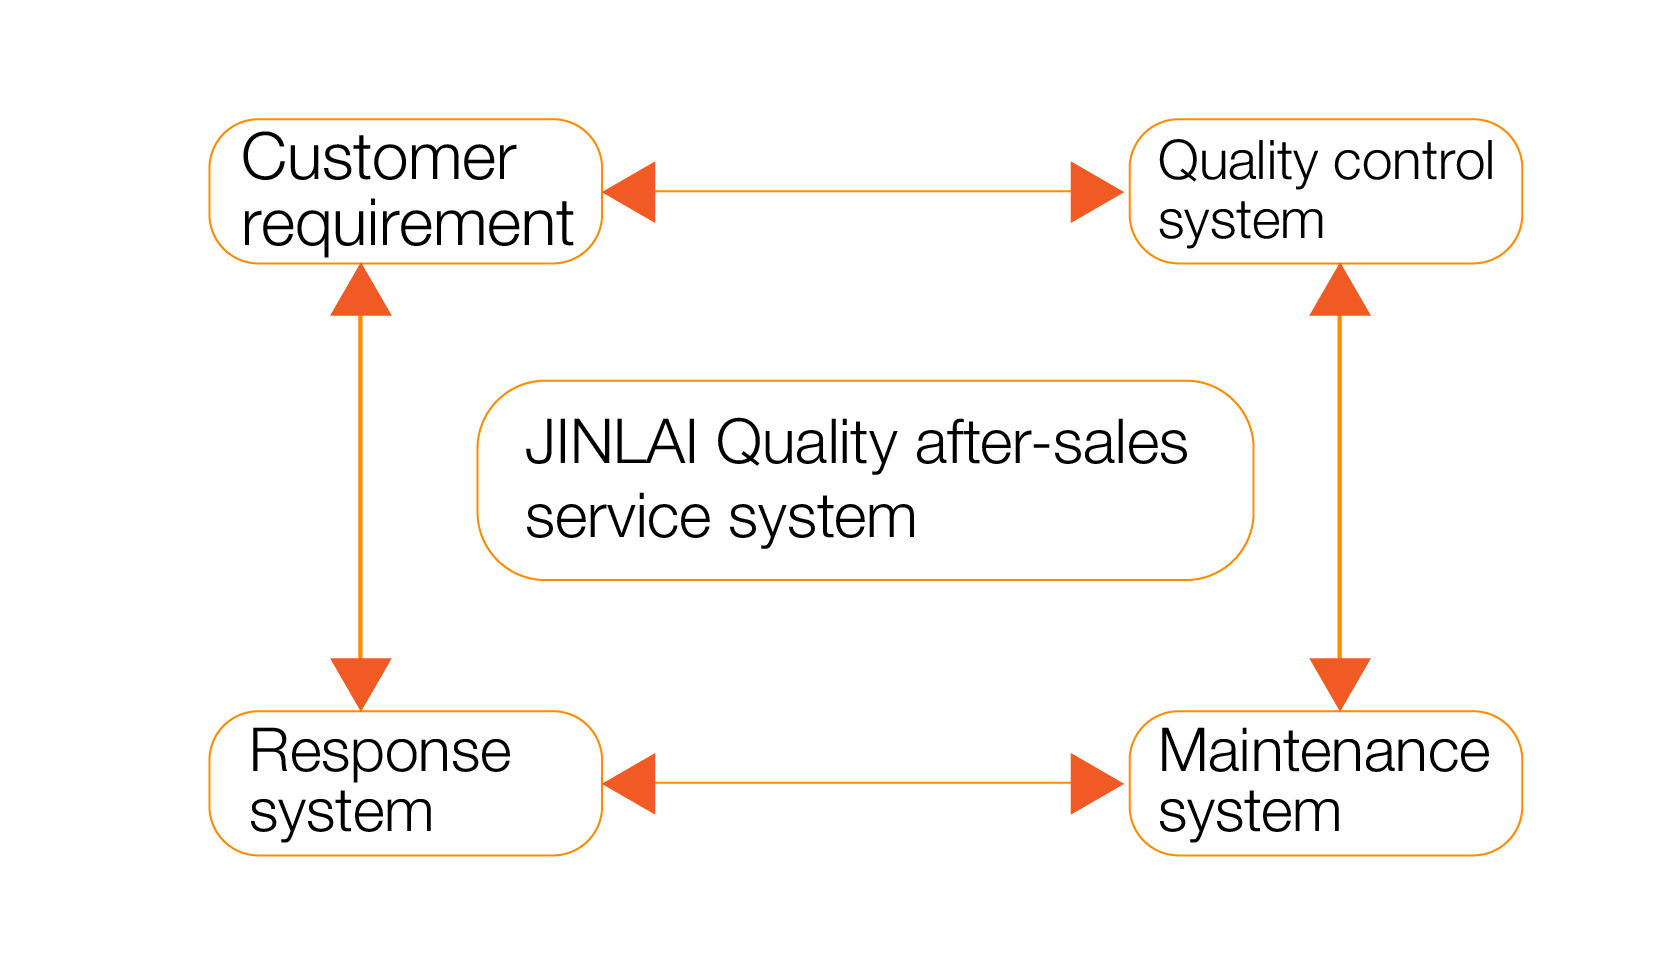 After-sales service system